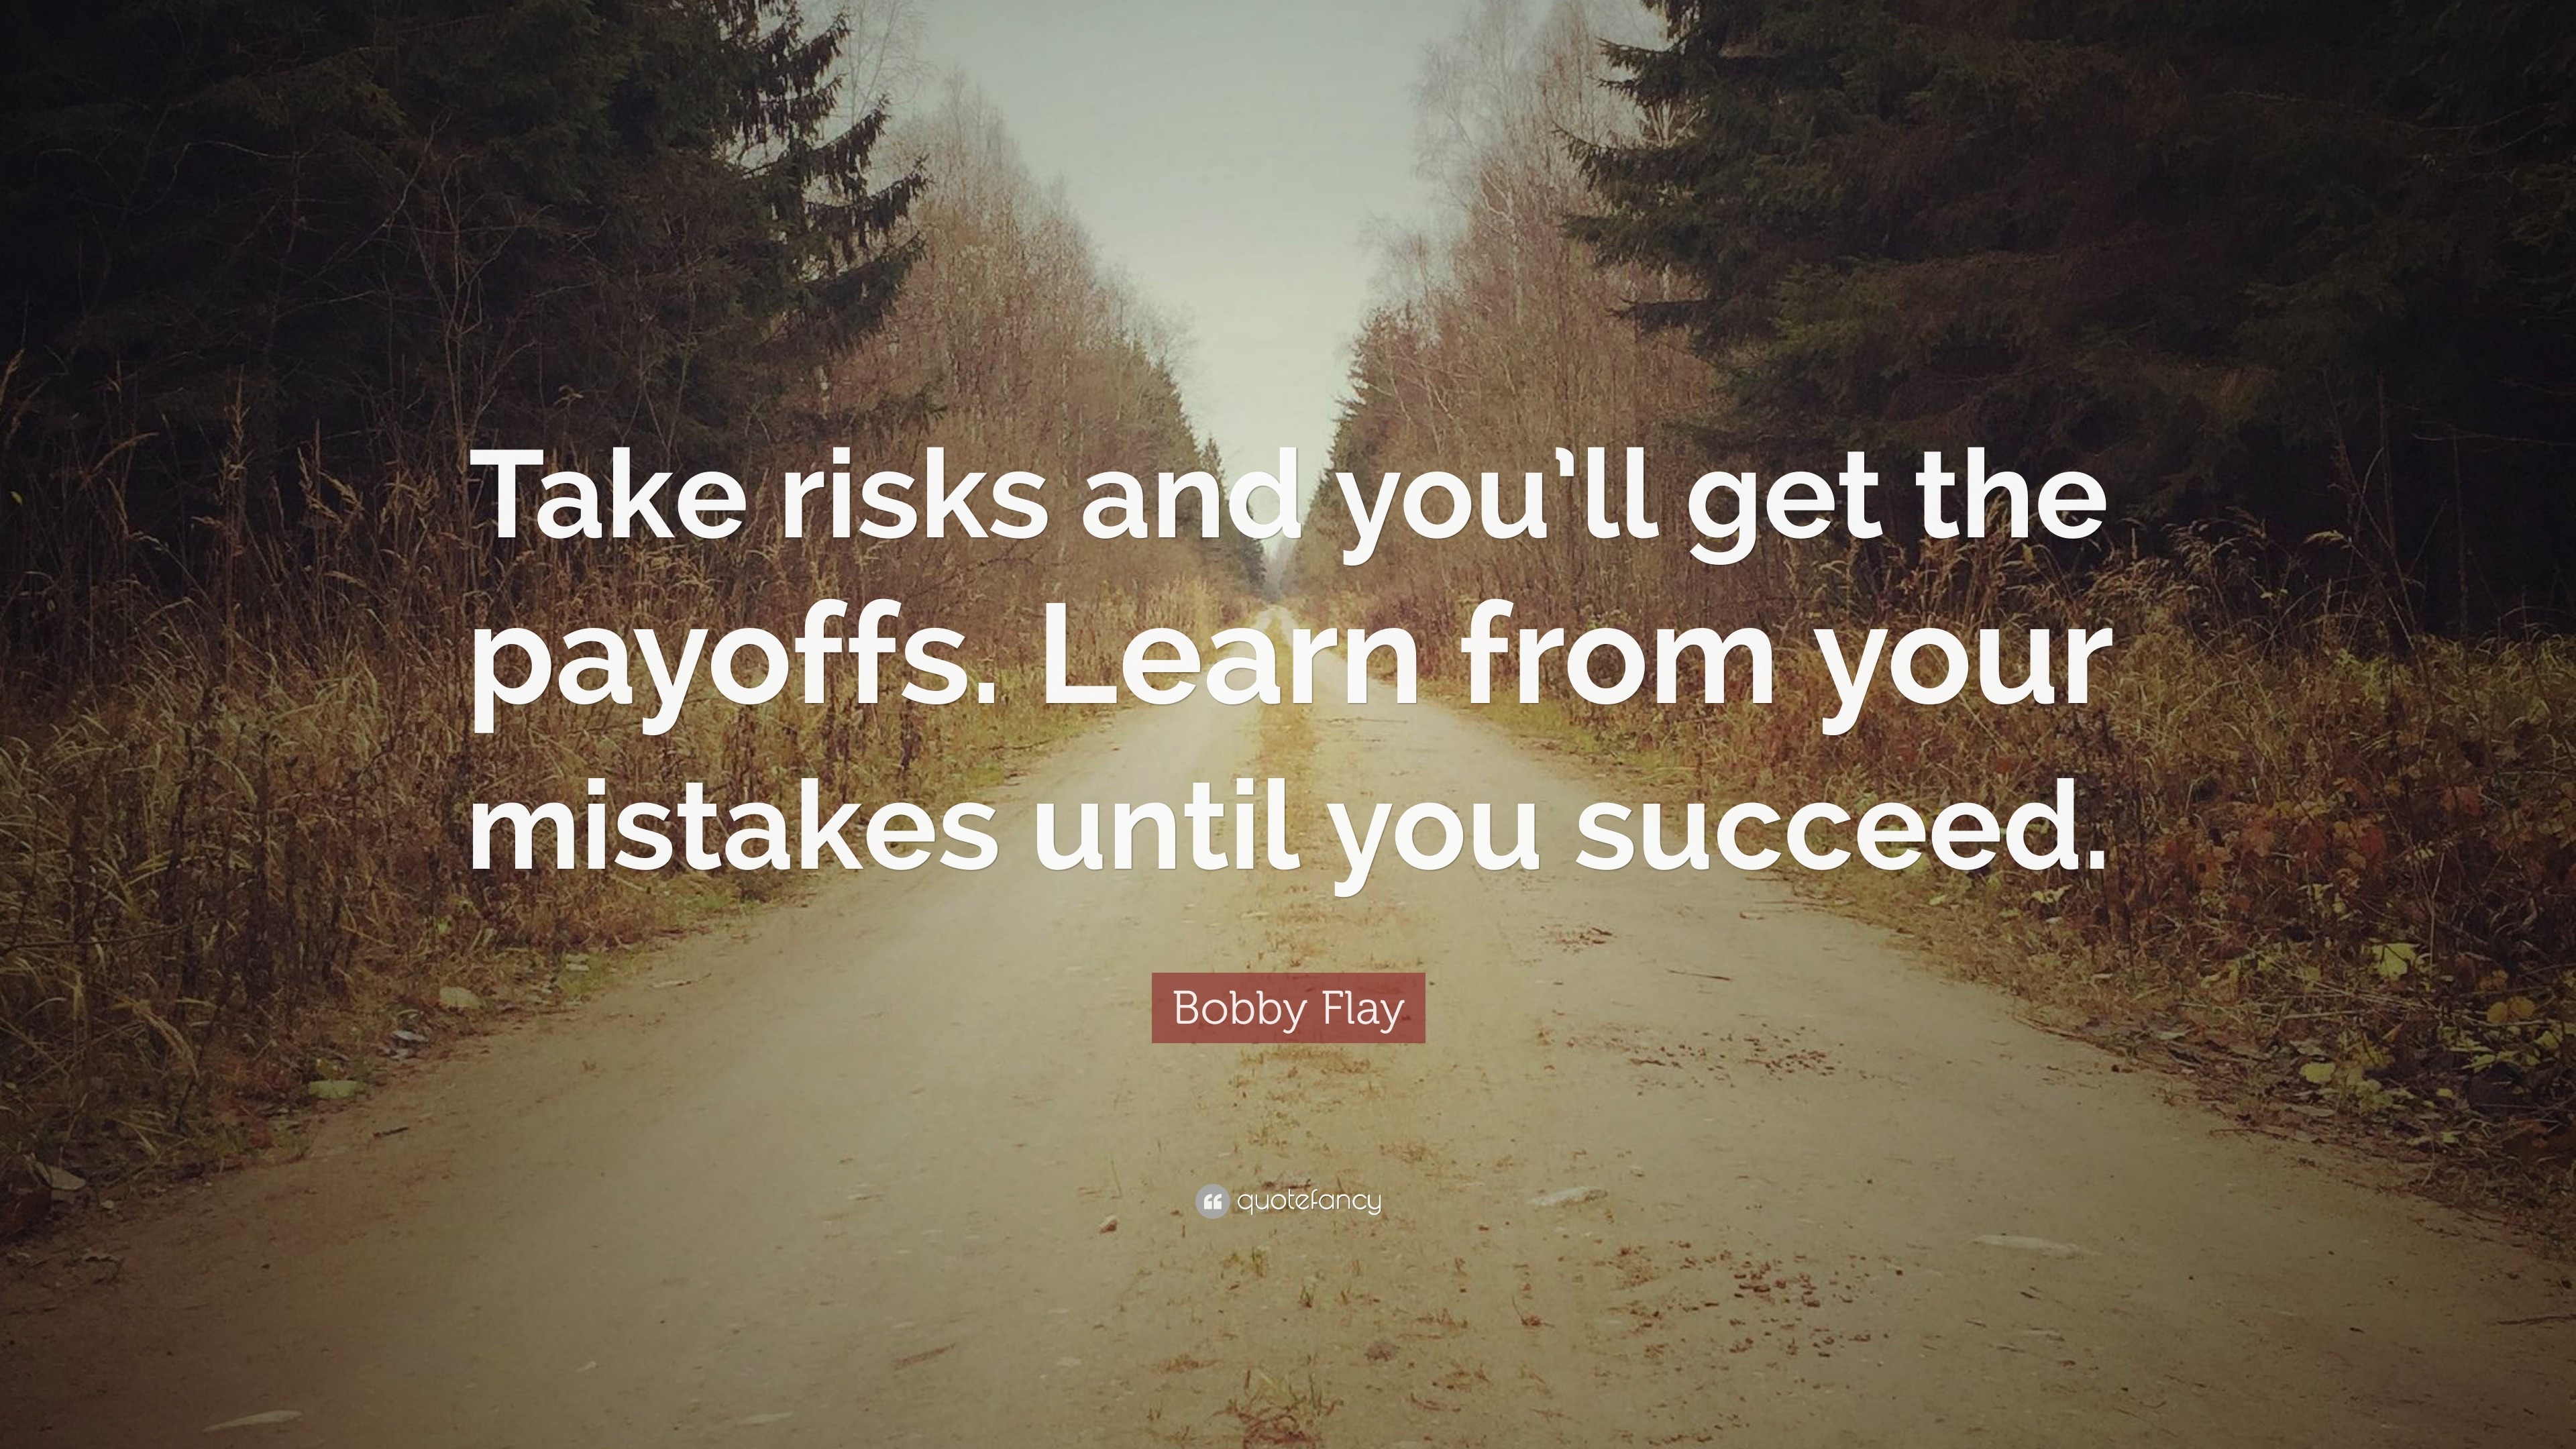 Bobby Flay Quote “Take risks and you’ll get the payoffs